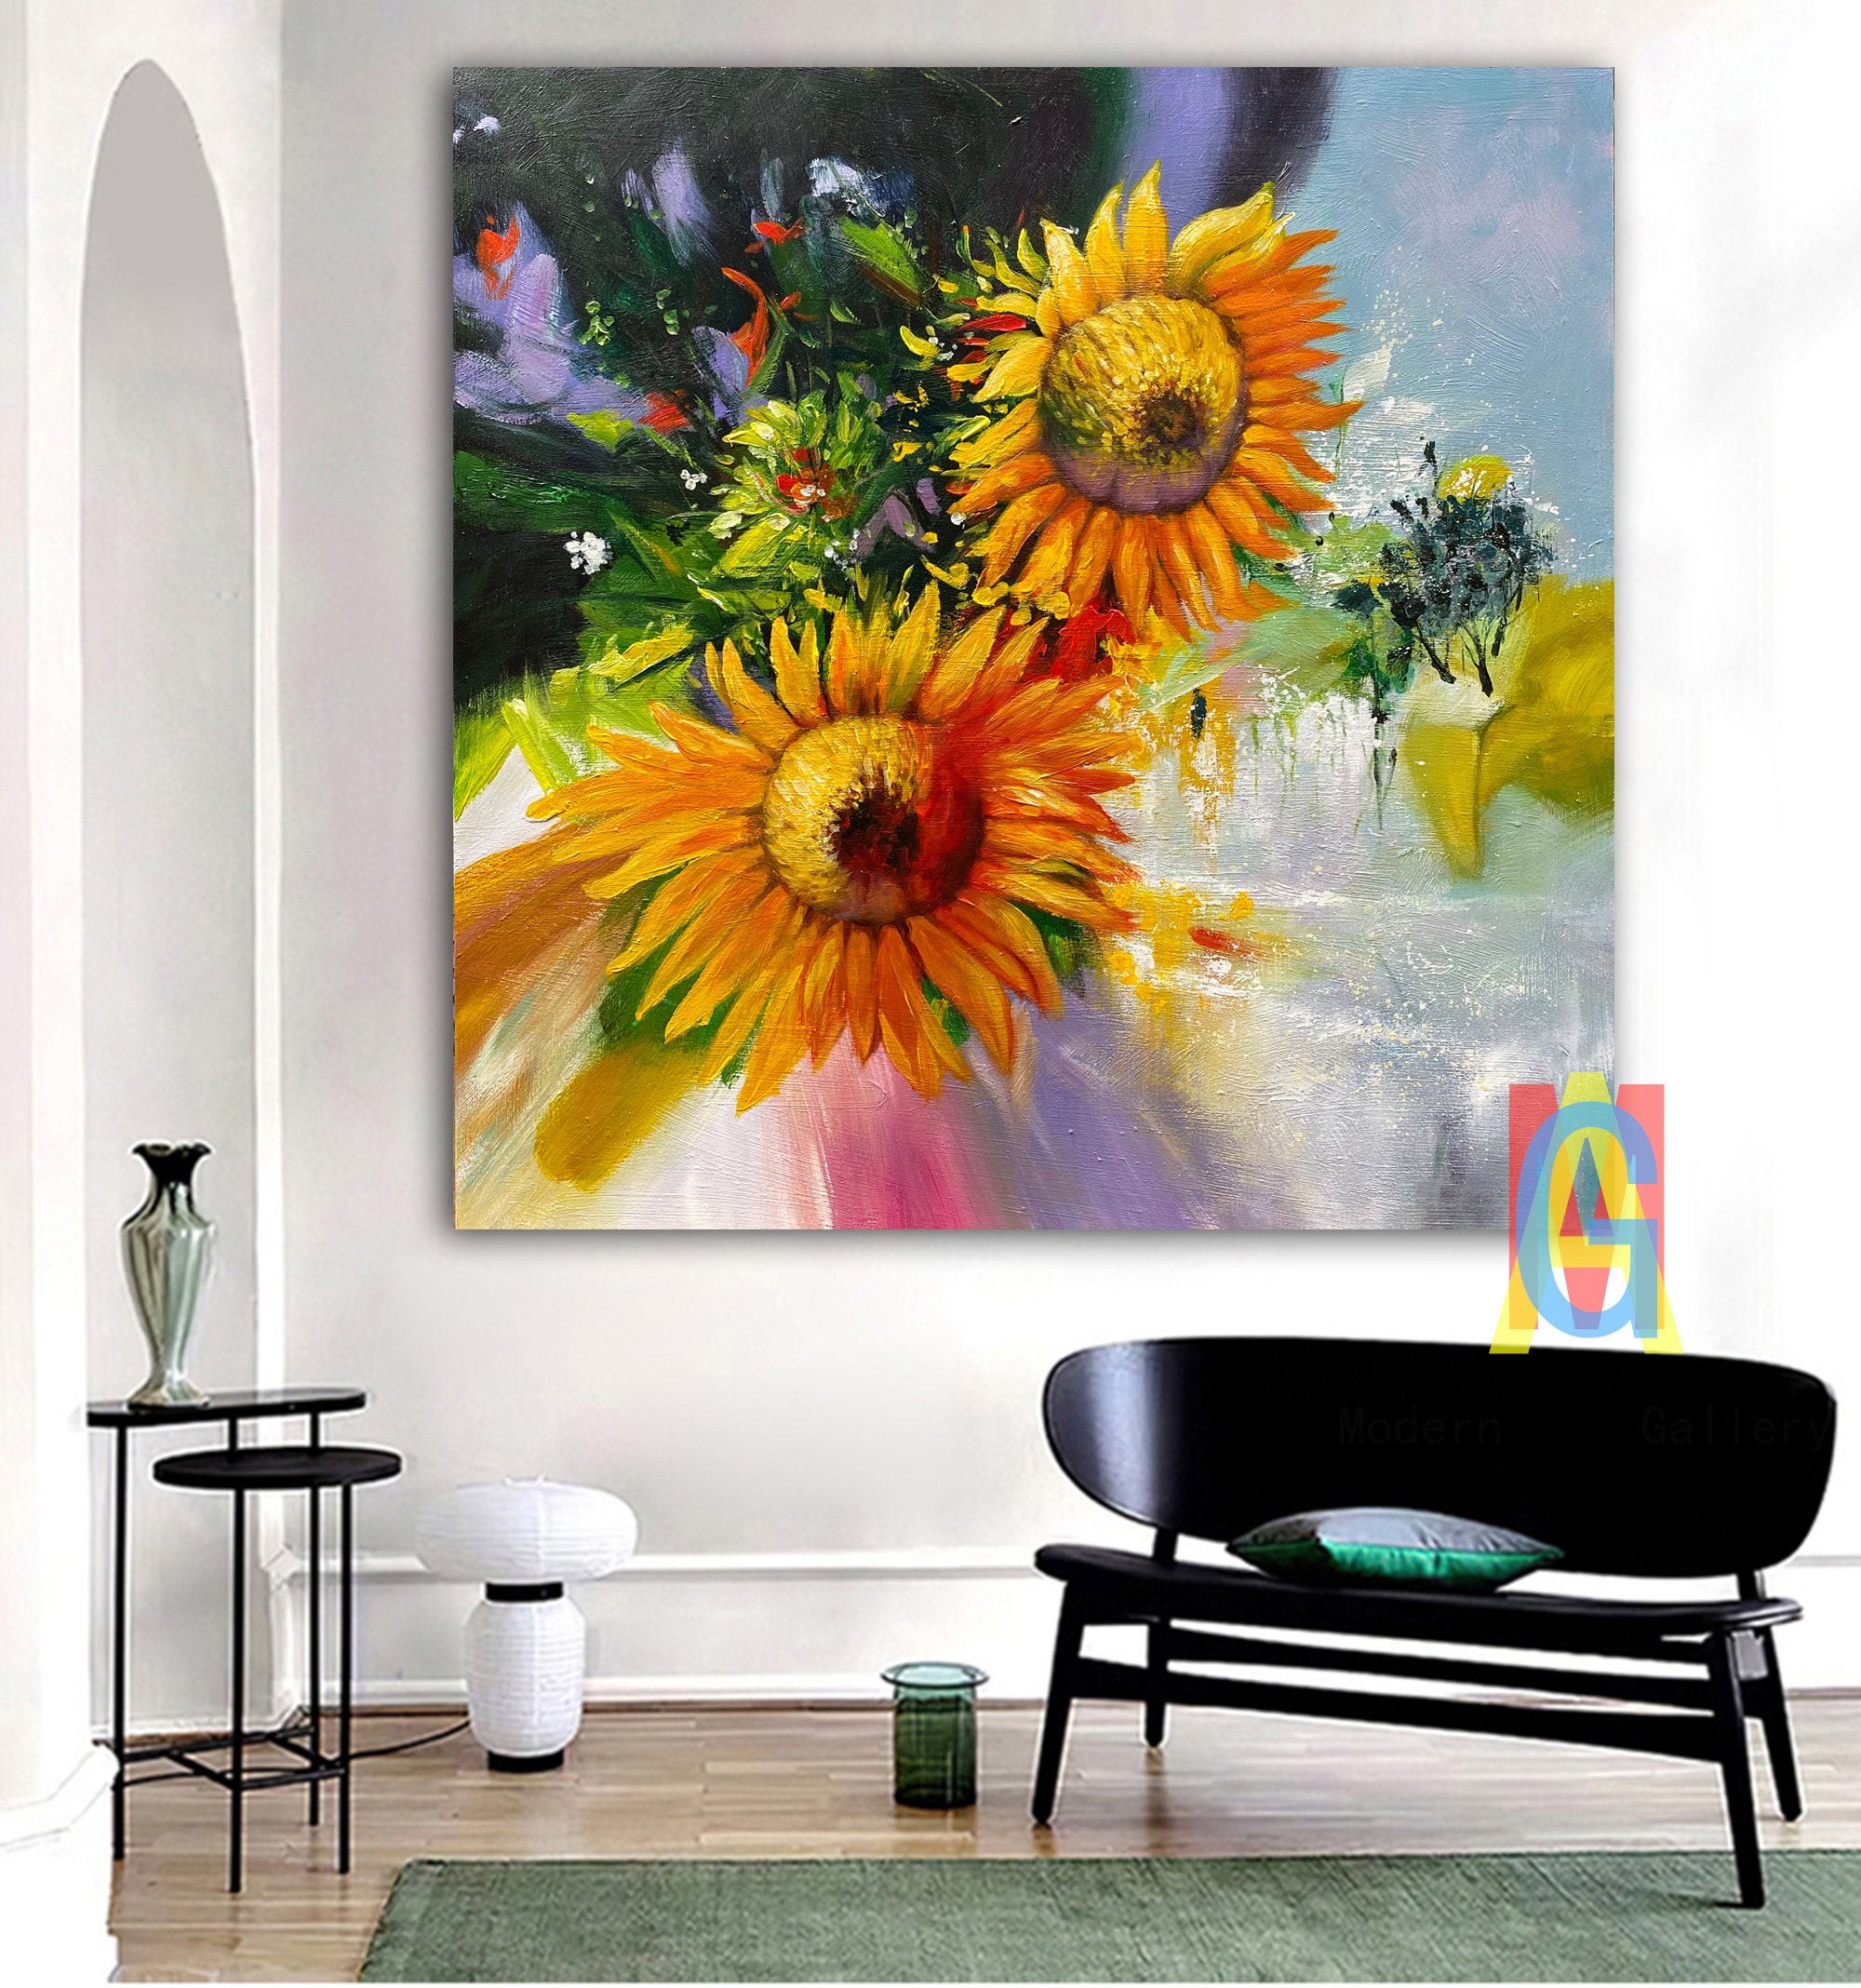 Sunflower painting Large sunflower painting Flower painting | Etsy